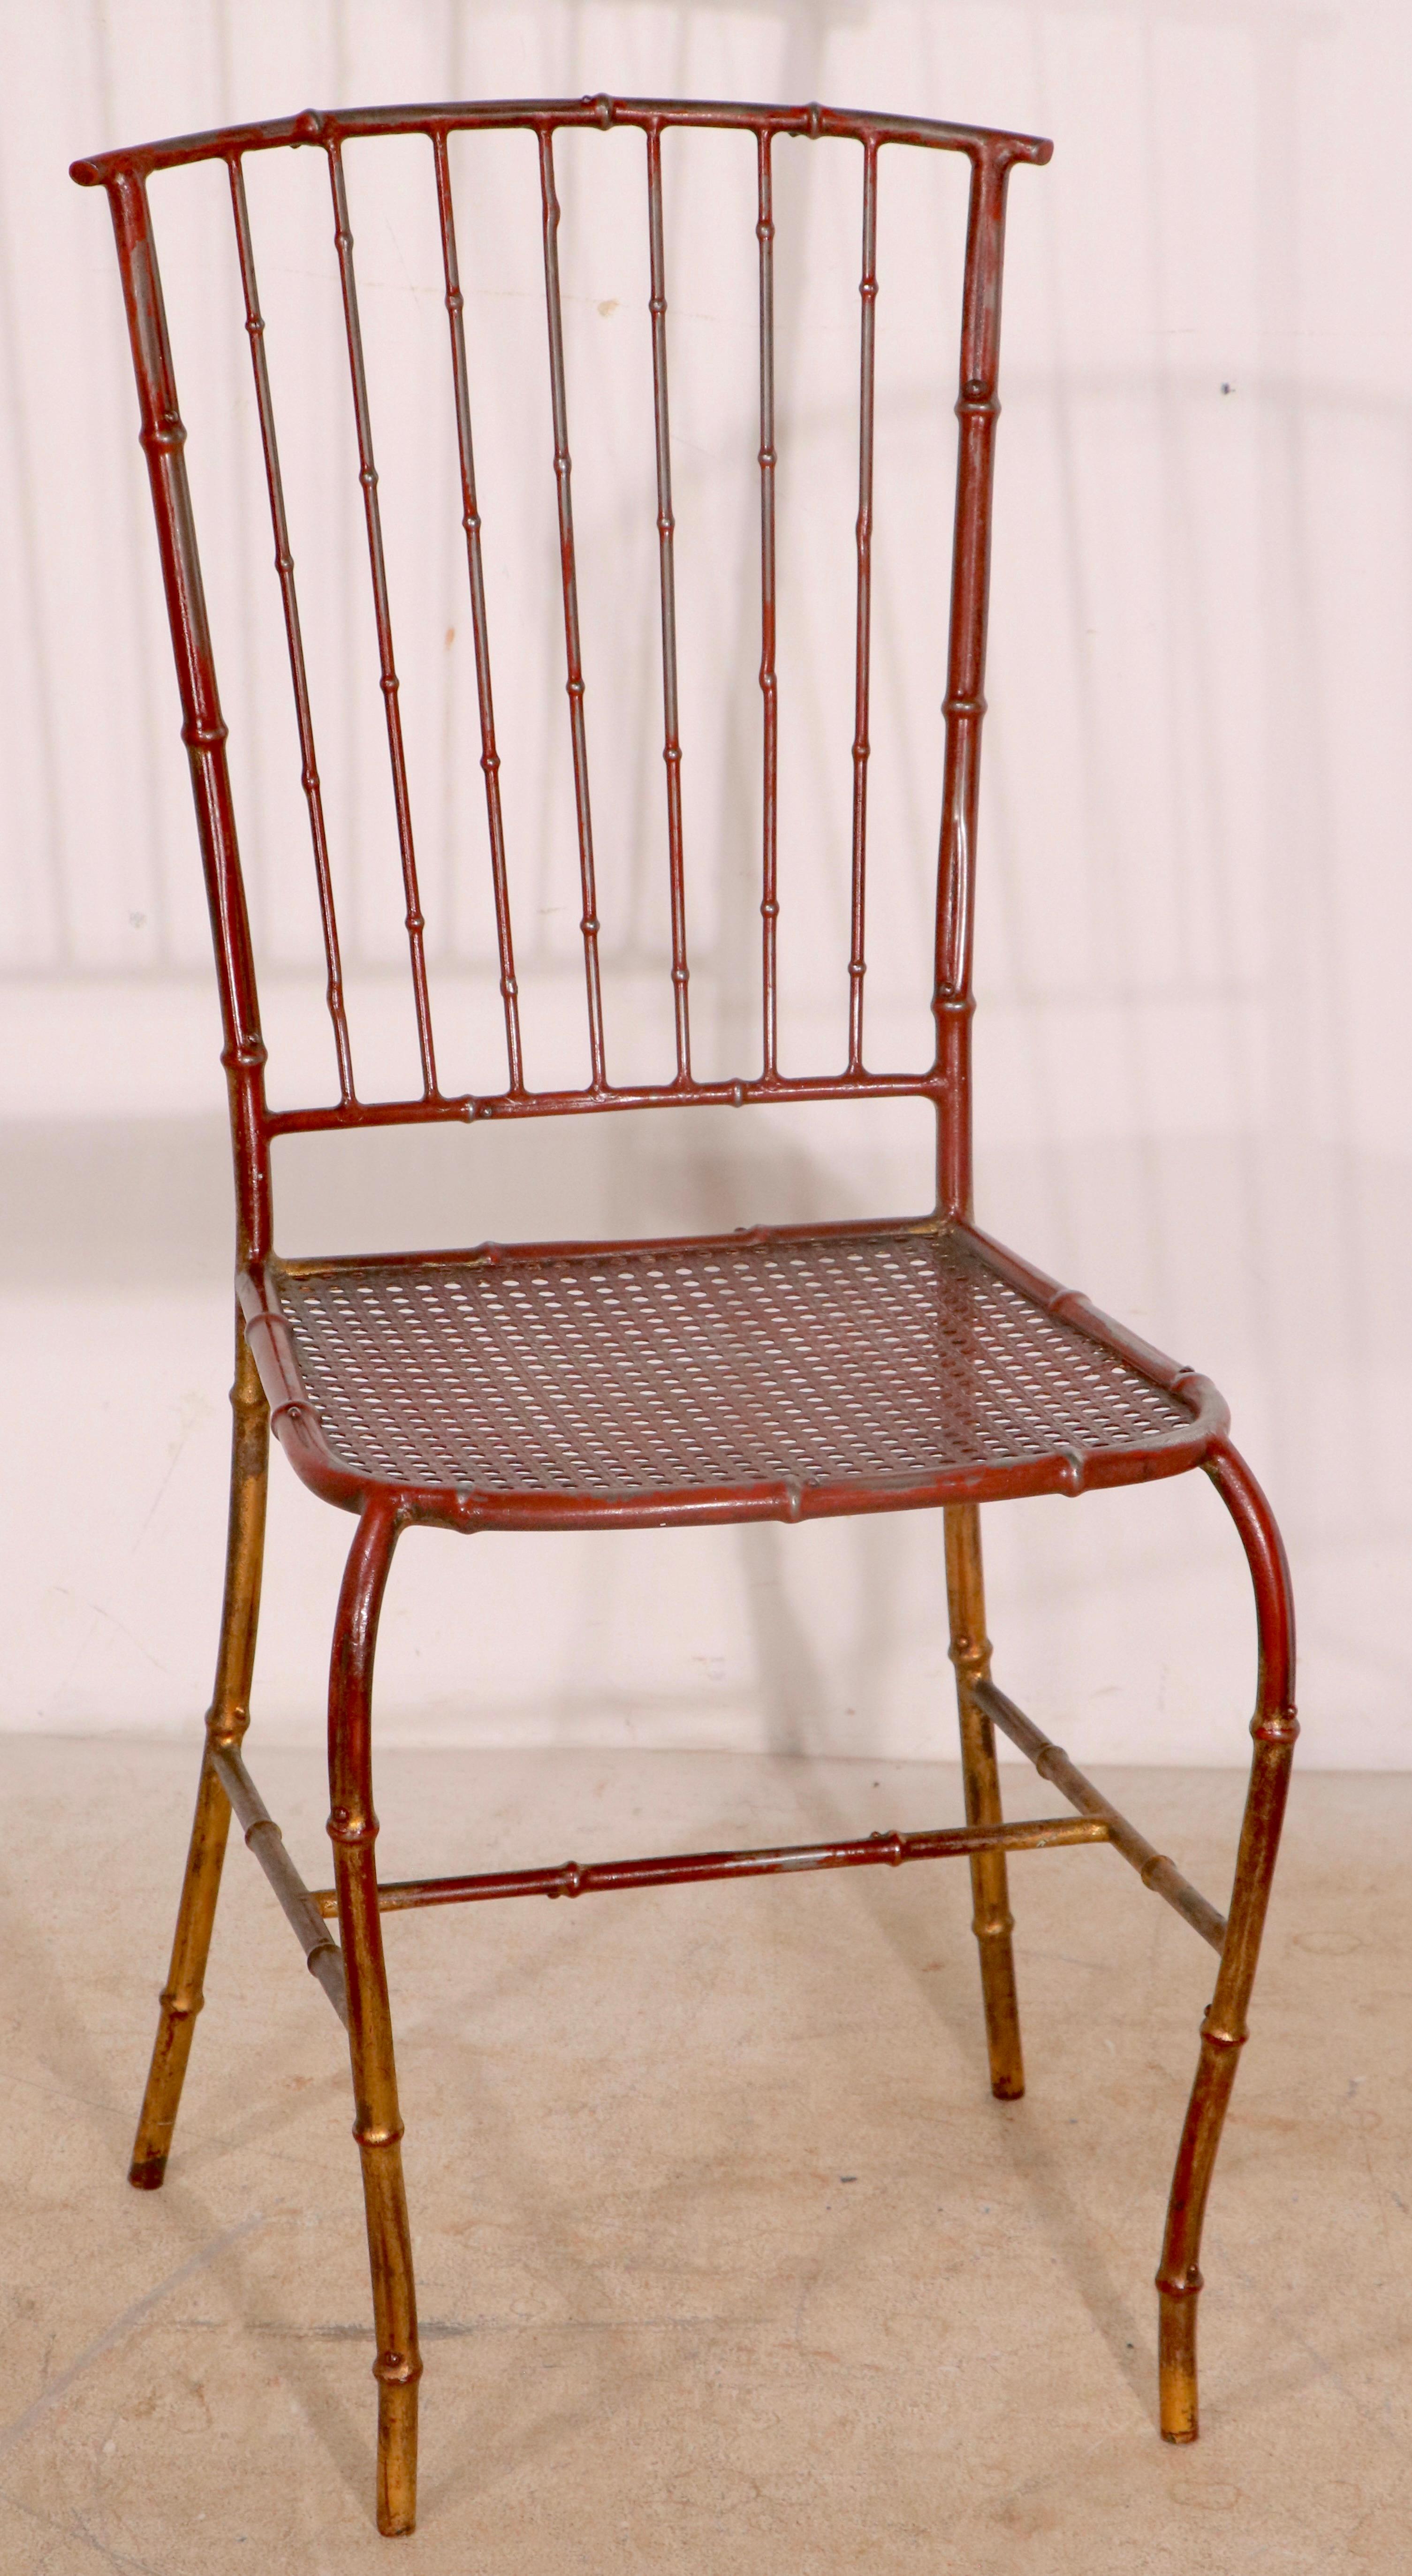 Voguish metal cafe chair having a faux bamboo metal frame, and metal mesh seat. The chair is in it’s original red/gold paint finish, it is structurally sound and sturdy, clean and ready to use. 
Suitable for both indoor, and outdoor use, this chair